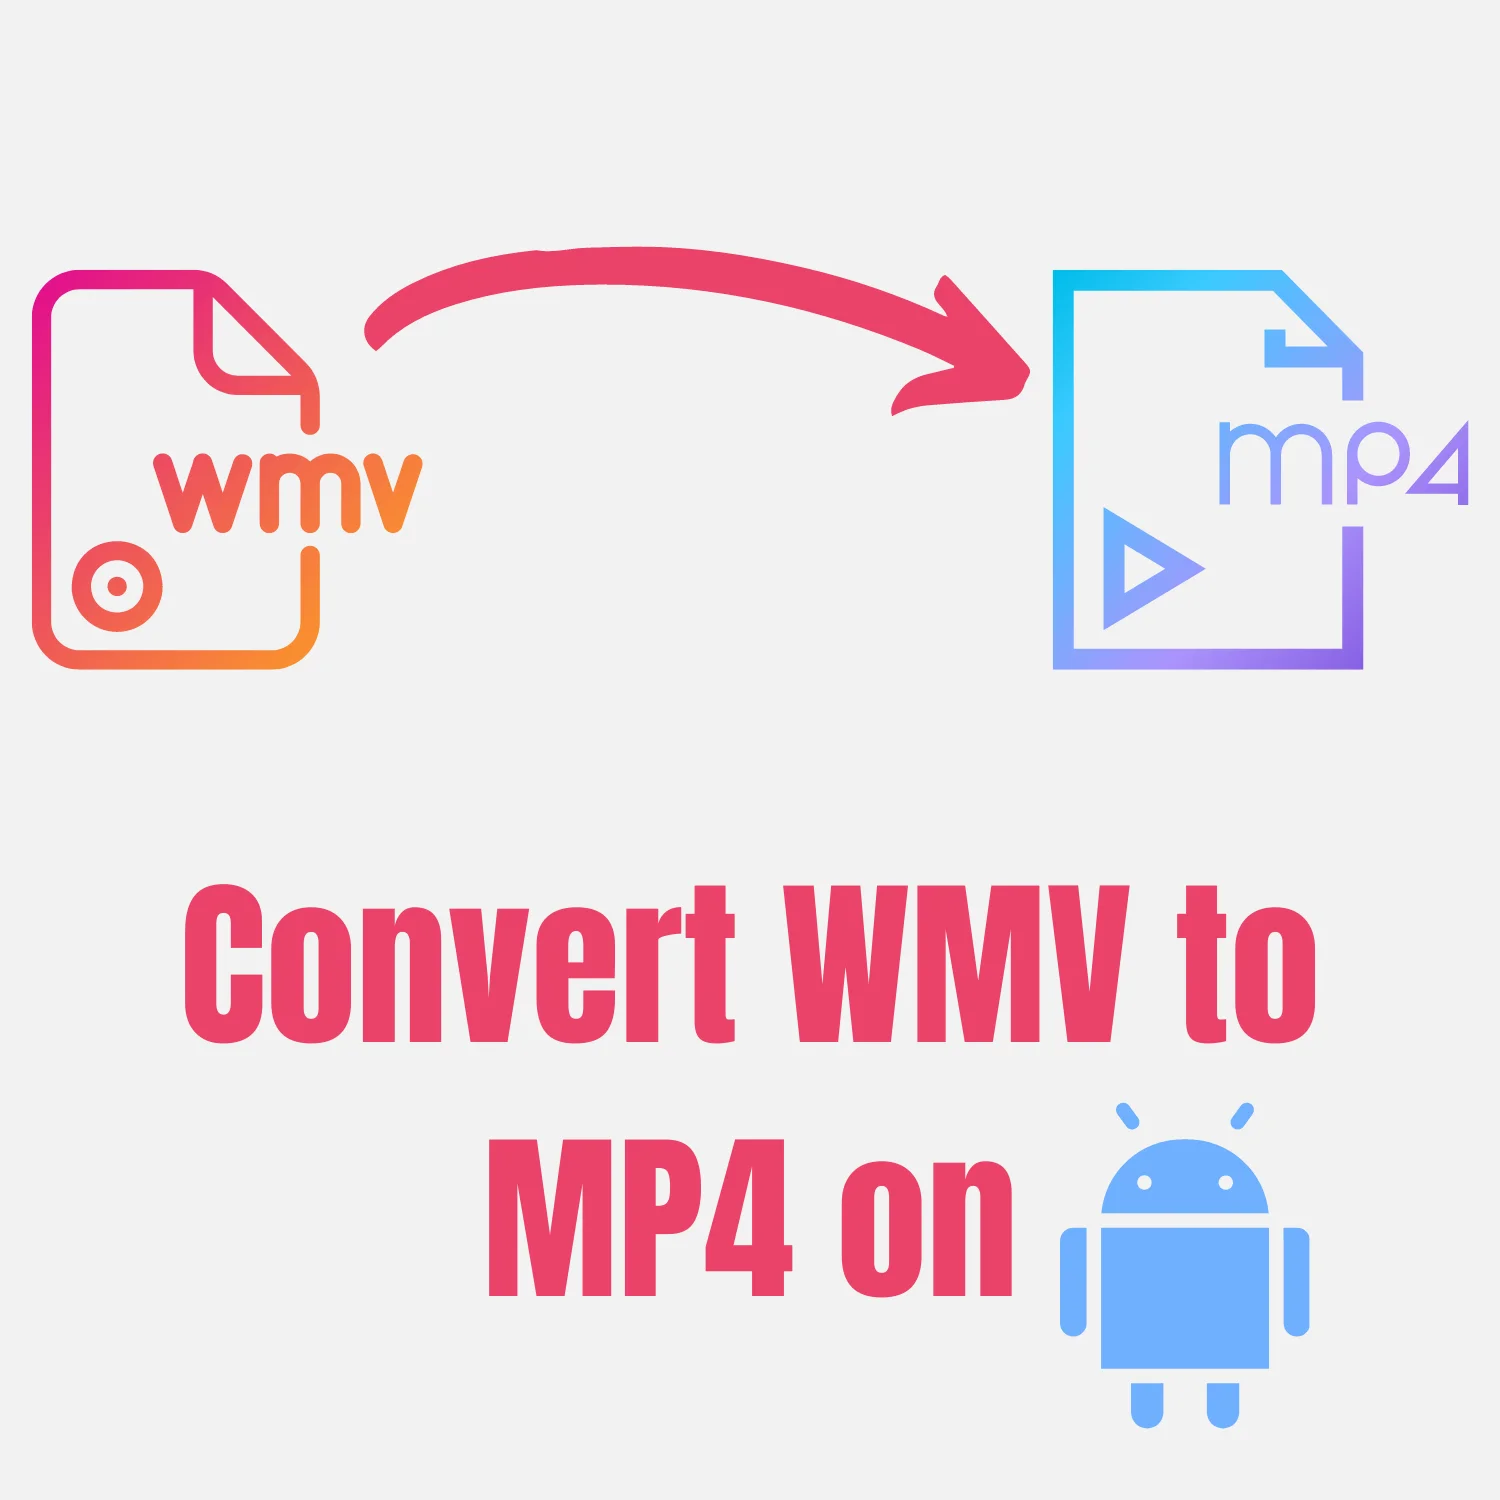 Convert WMV to MP4 on Android